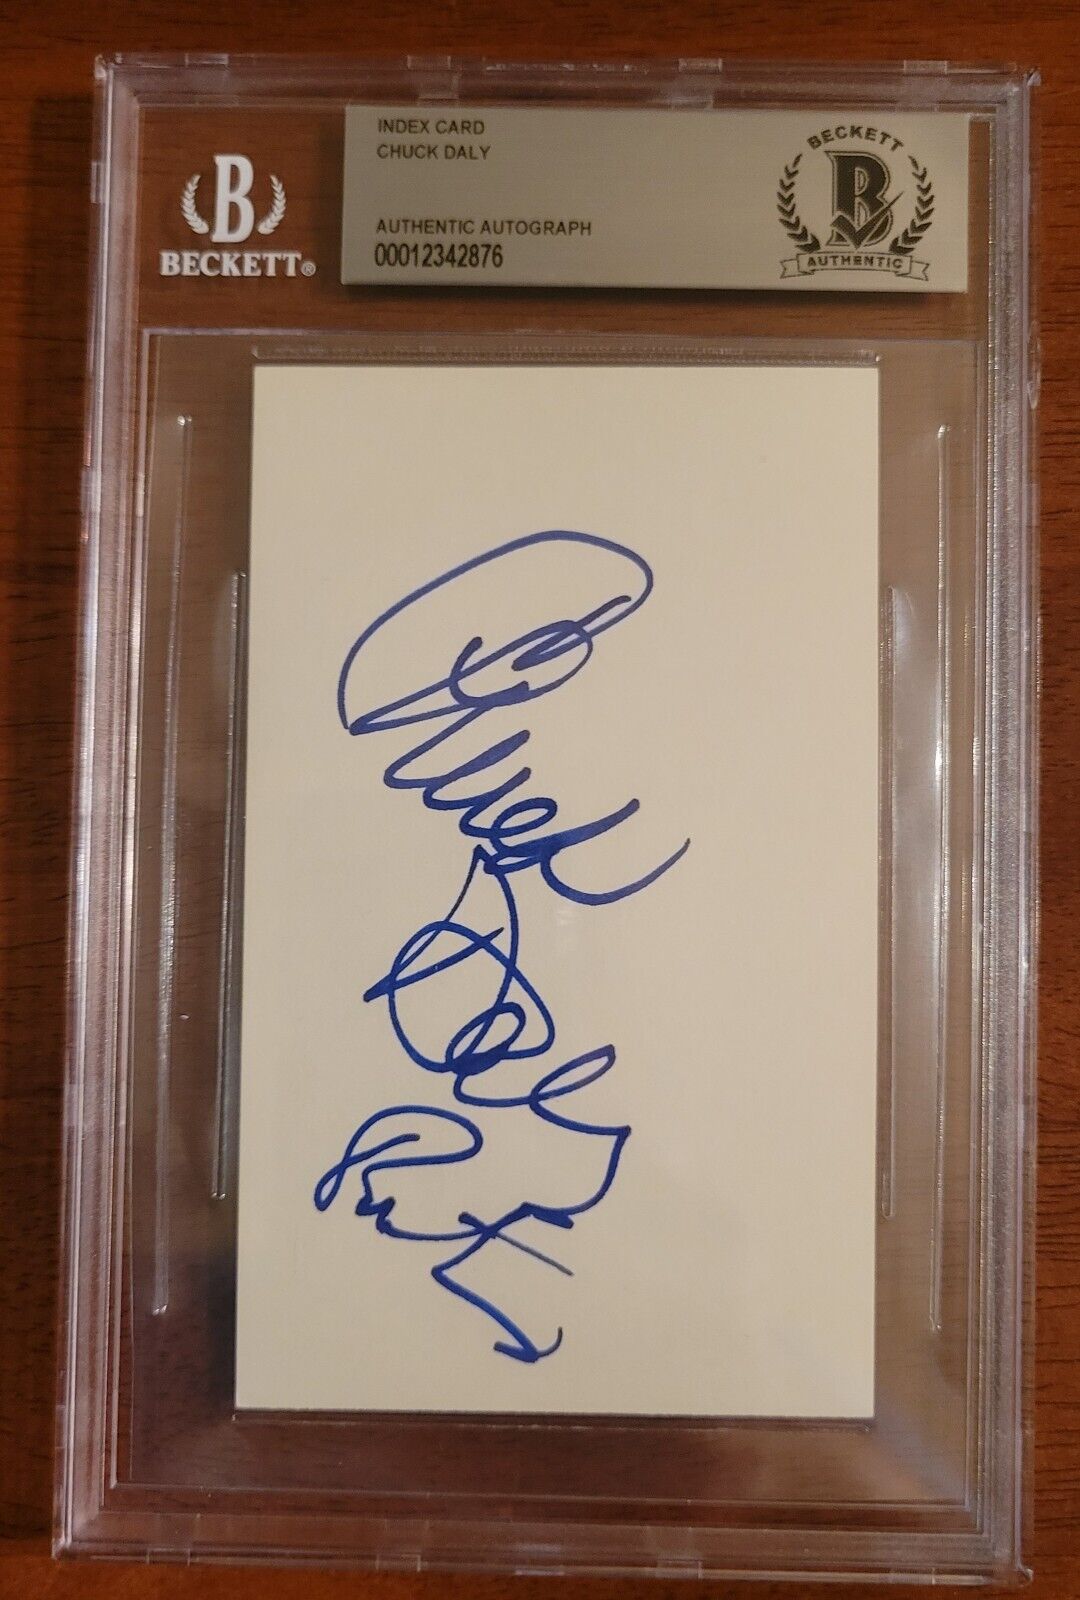 Chuck Daly Full Signed 3x5 Index Card Beckett Encapsulated Usa Detroit Pistons